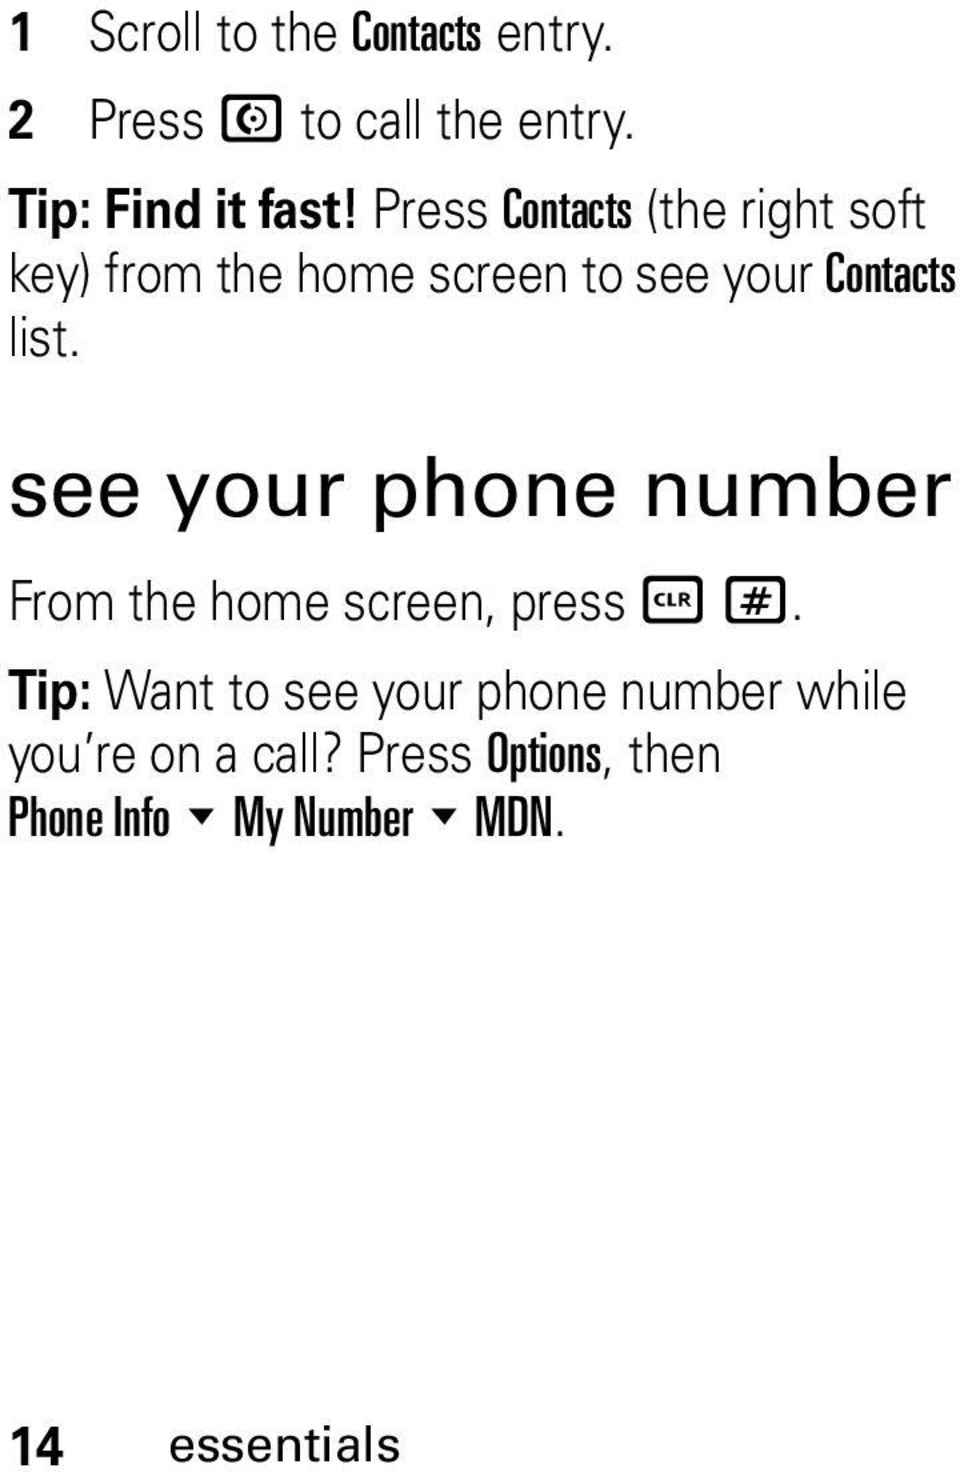 see your phone number From the home screen, press B #.